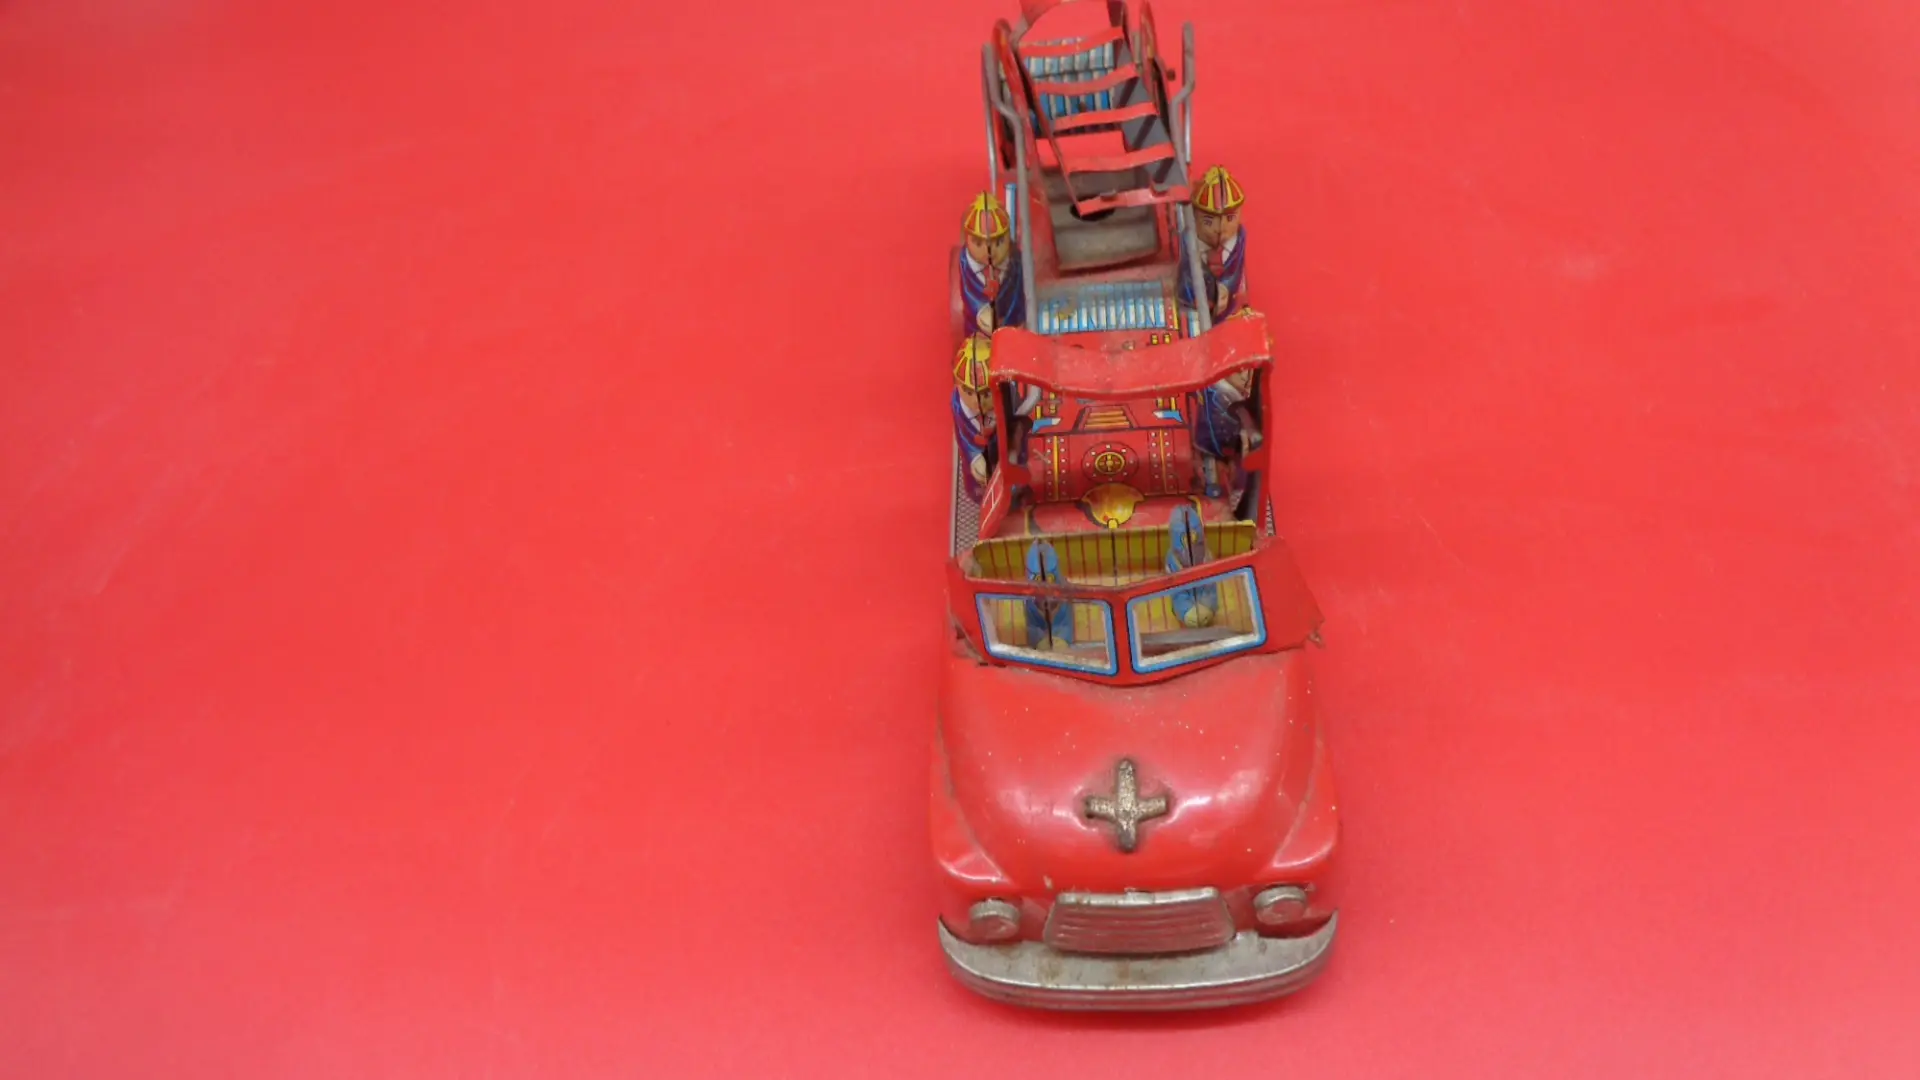 Top view of Japan 6 Man Ladder Fire Truck Toy